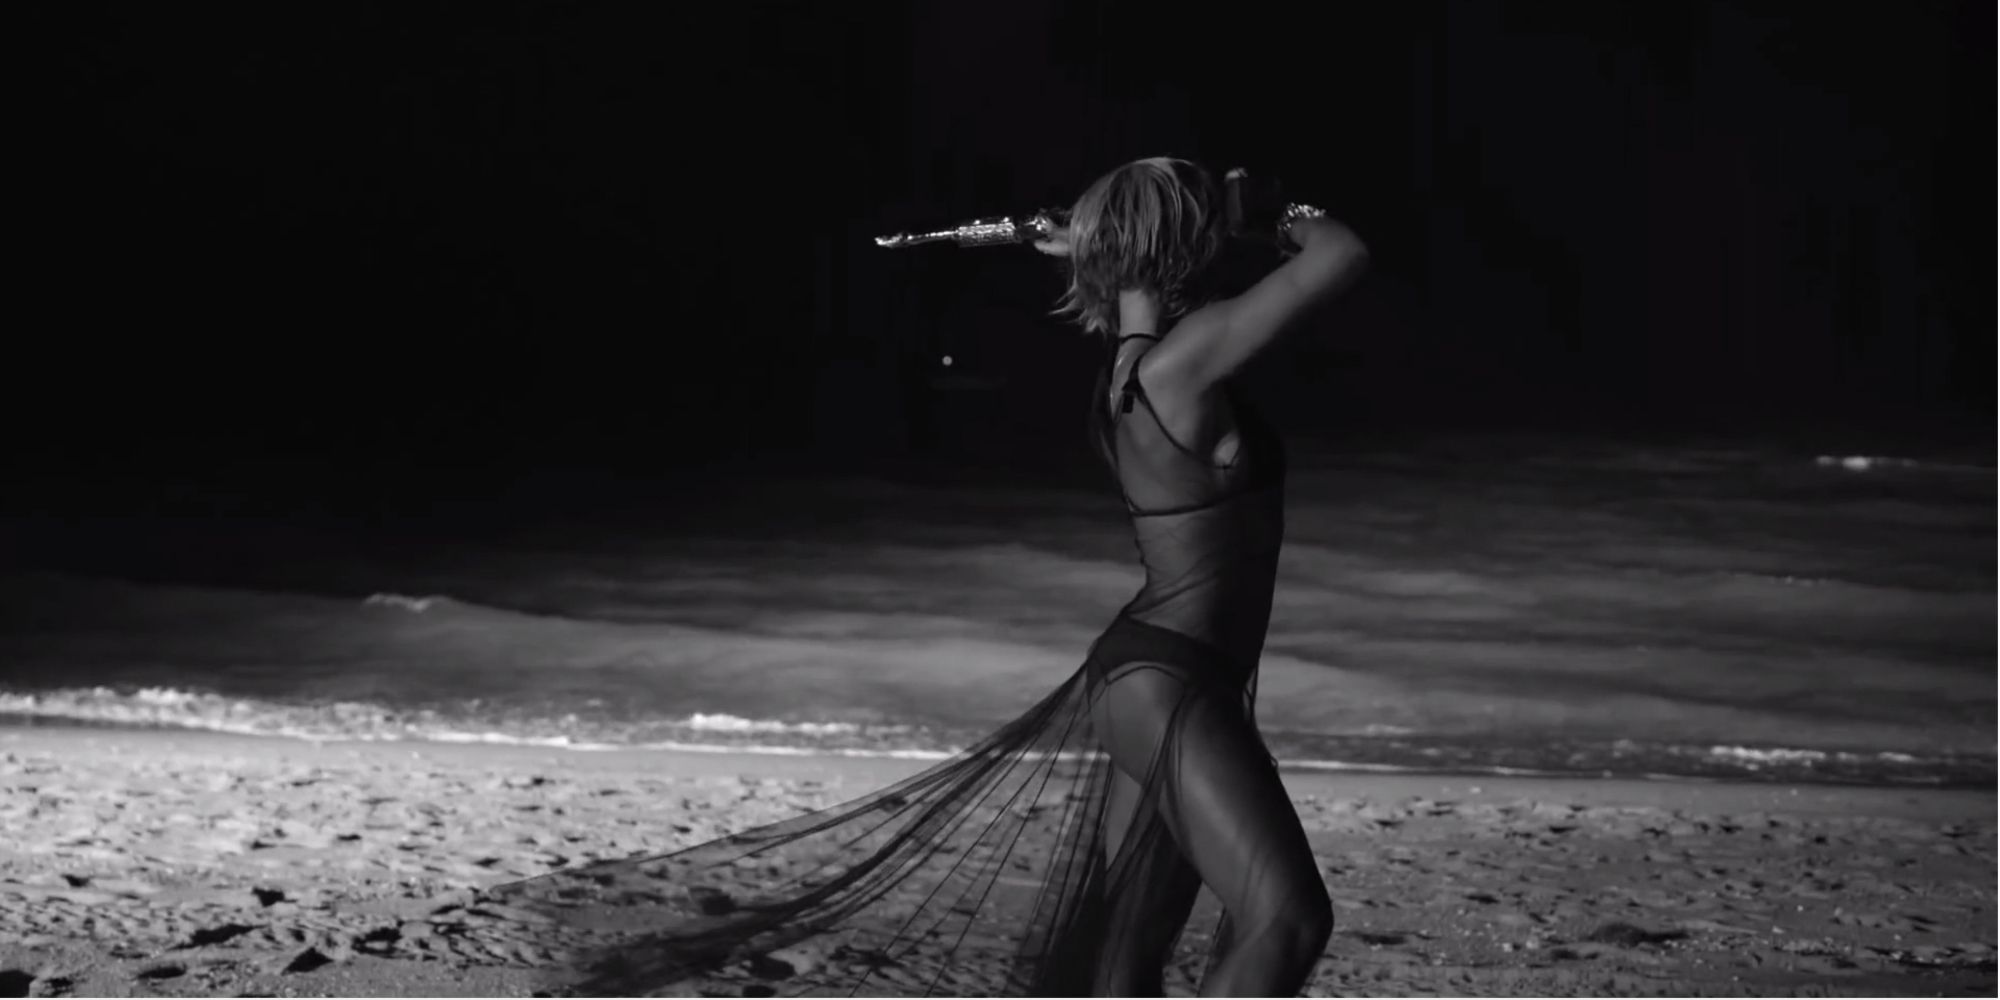 Beyoncé with a trophy on the beach in the Drunk in Love video